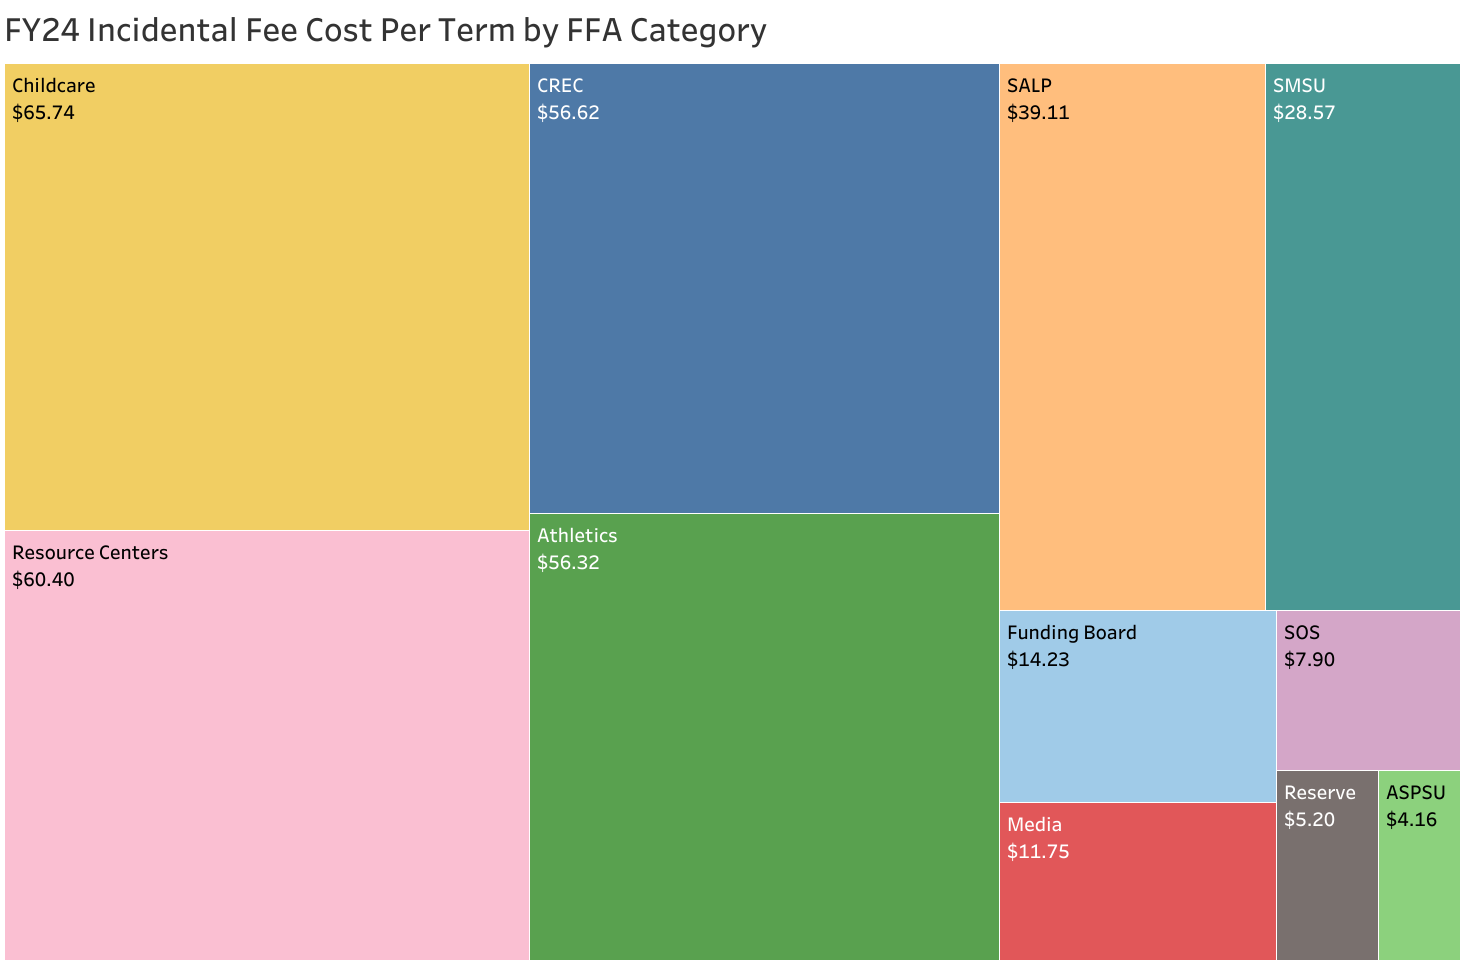 A chart that shows how the incidental fee is allocated across FFAs